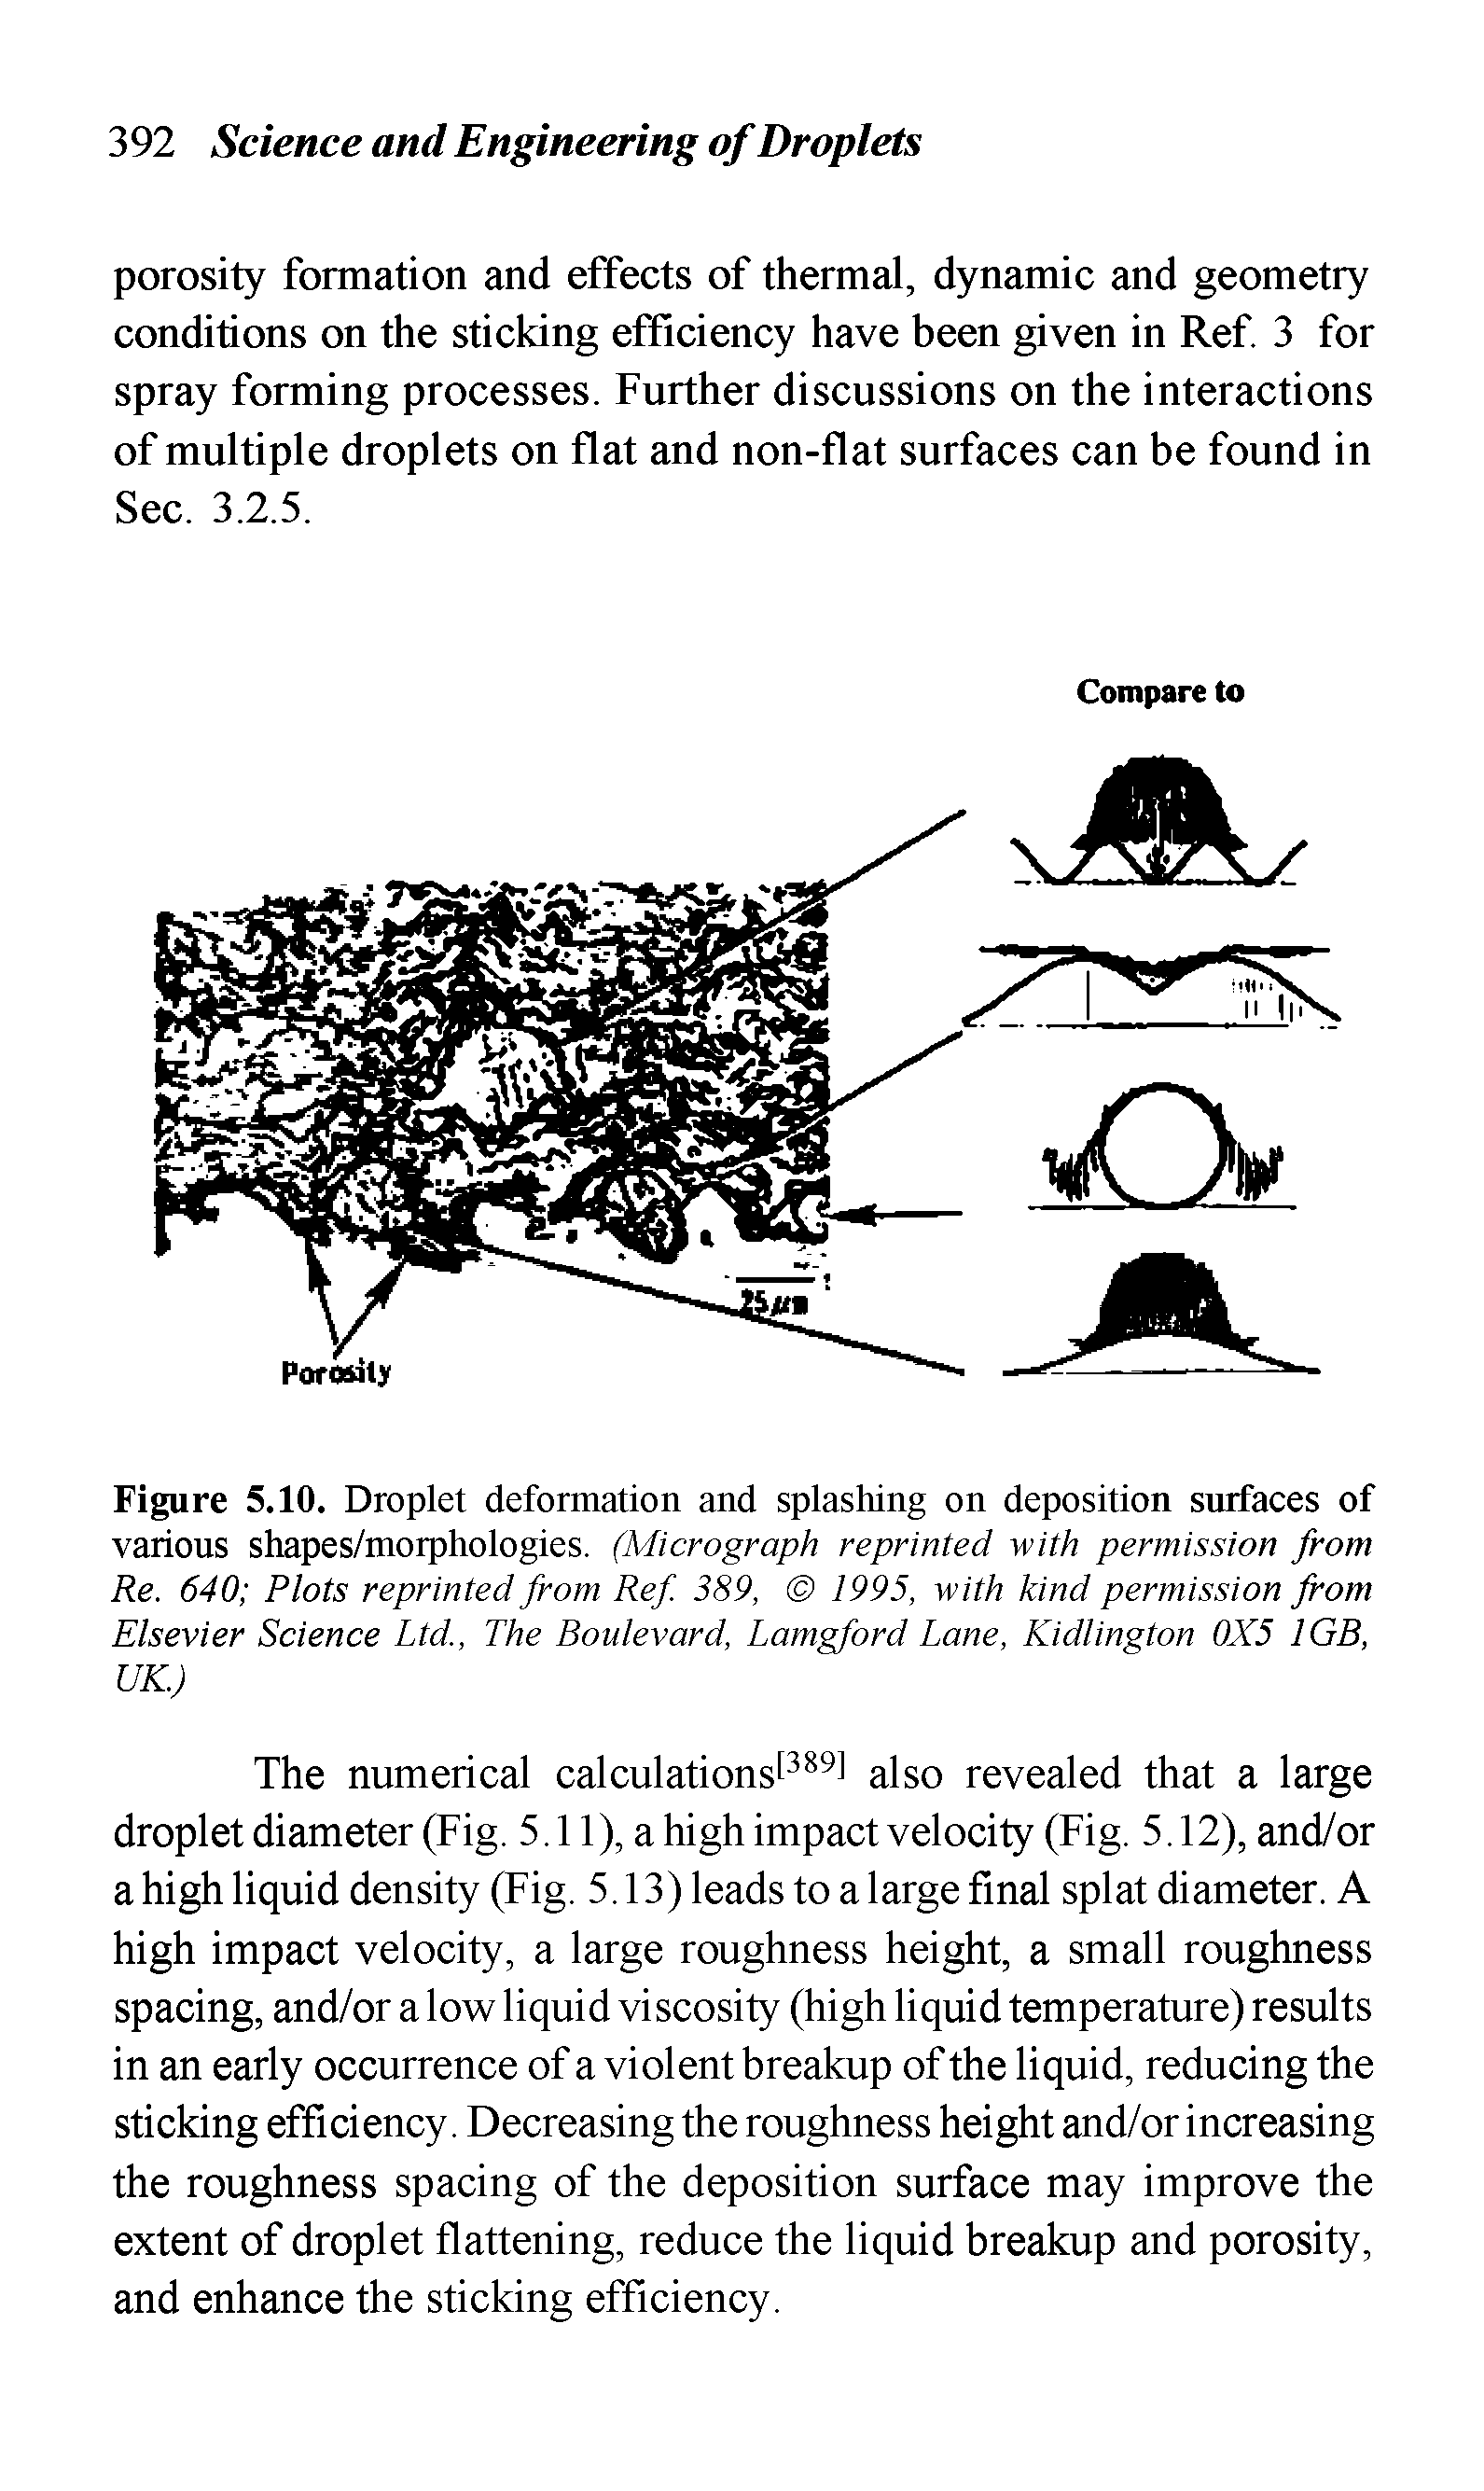 Figure 5.10. Droplet deformation and splashing on deposition surfaces of various shapes/morphologies. (Micrograph reprinted with permission from Re. 640 Plots reprinted from Ref 389, 1995, with kind permission from Elsevier Science Ltd., The Boulevard, Lamgford Lane, Kidlington 0X5 1GB, UK.)...